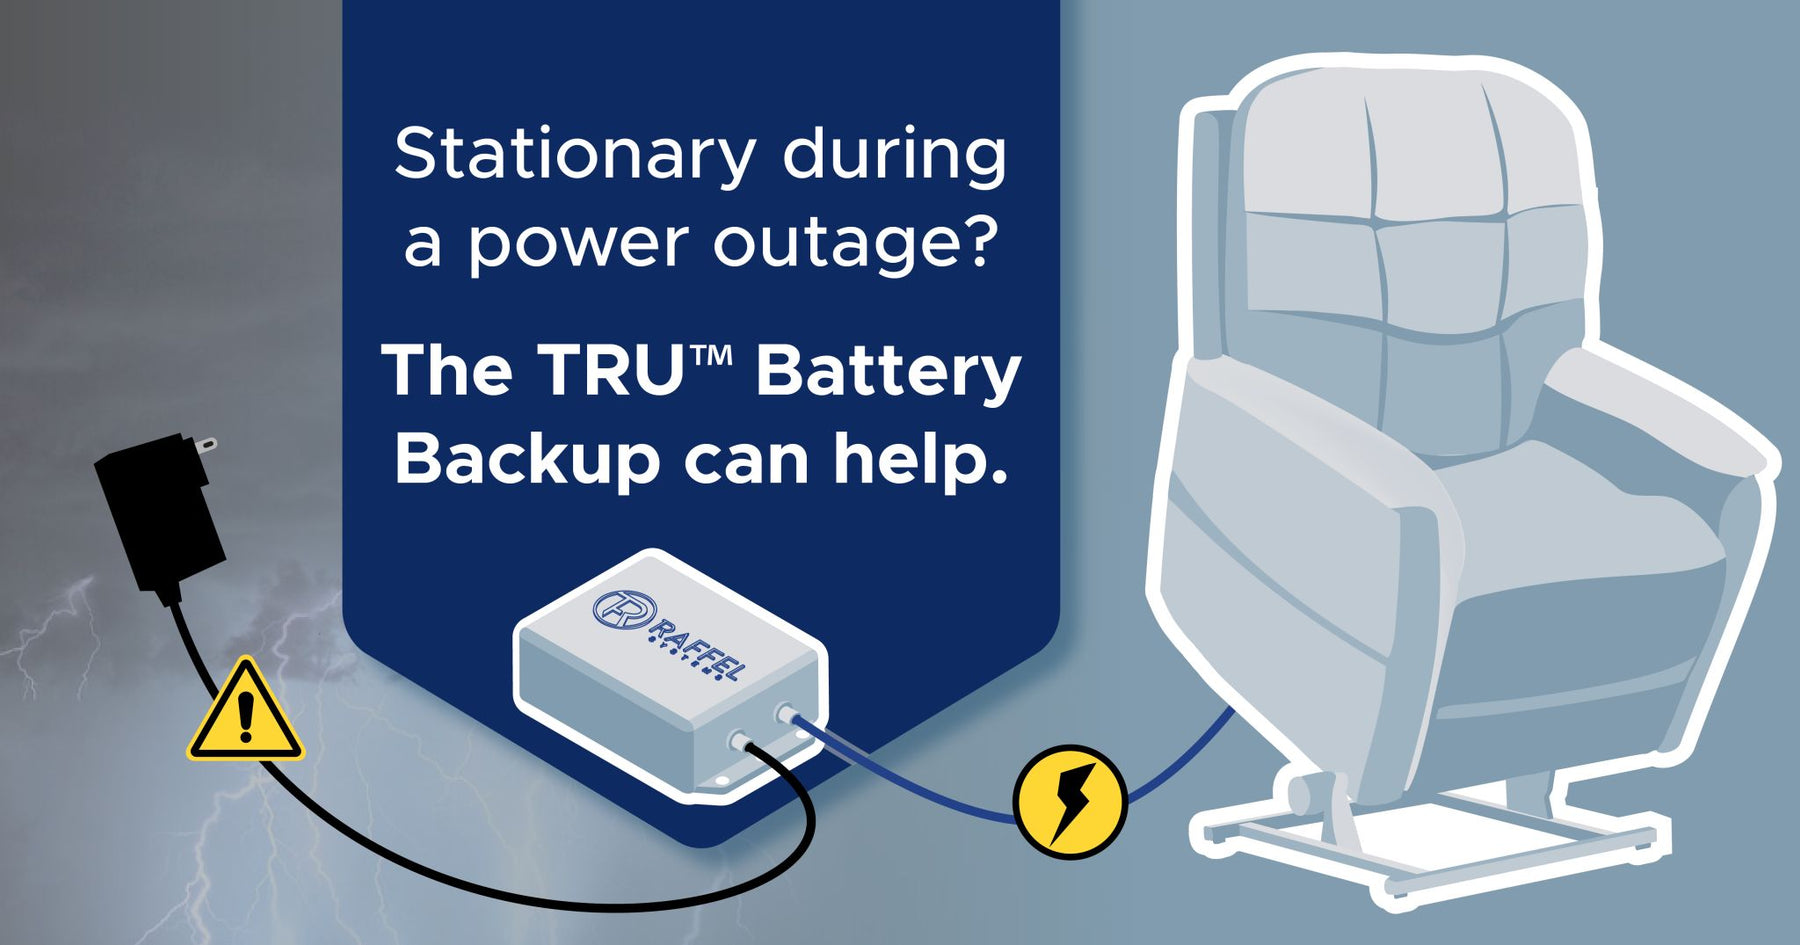 The best battery or power supply for emergency backup